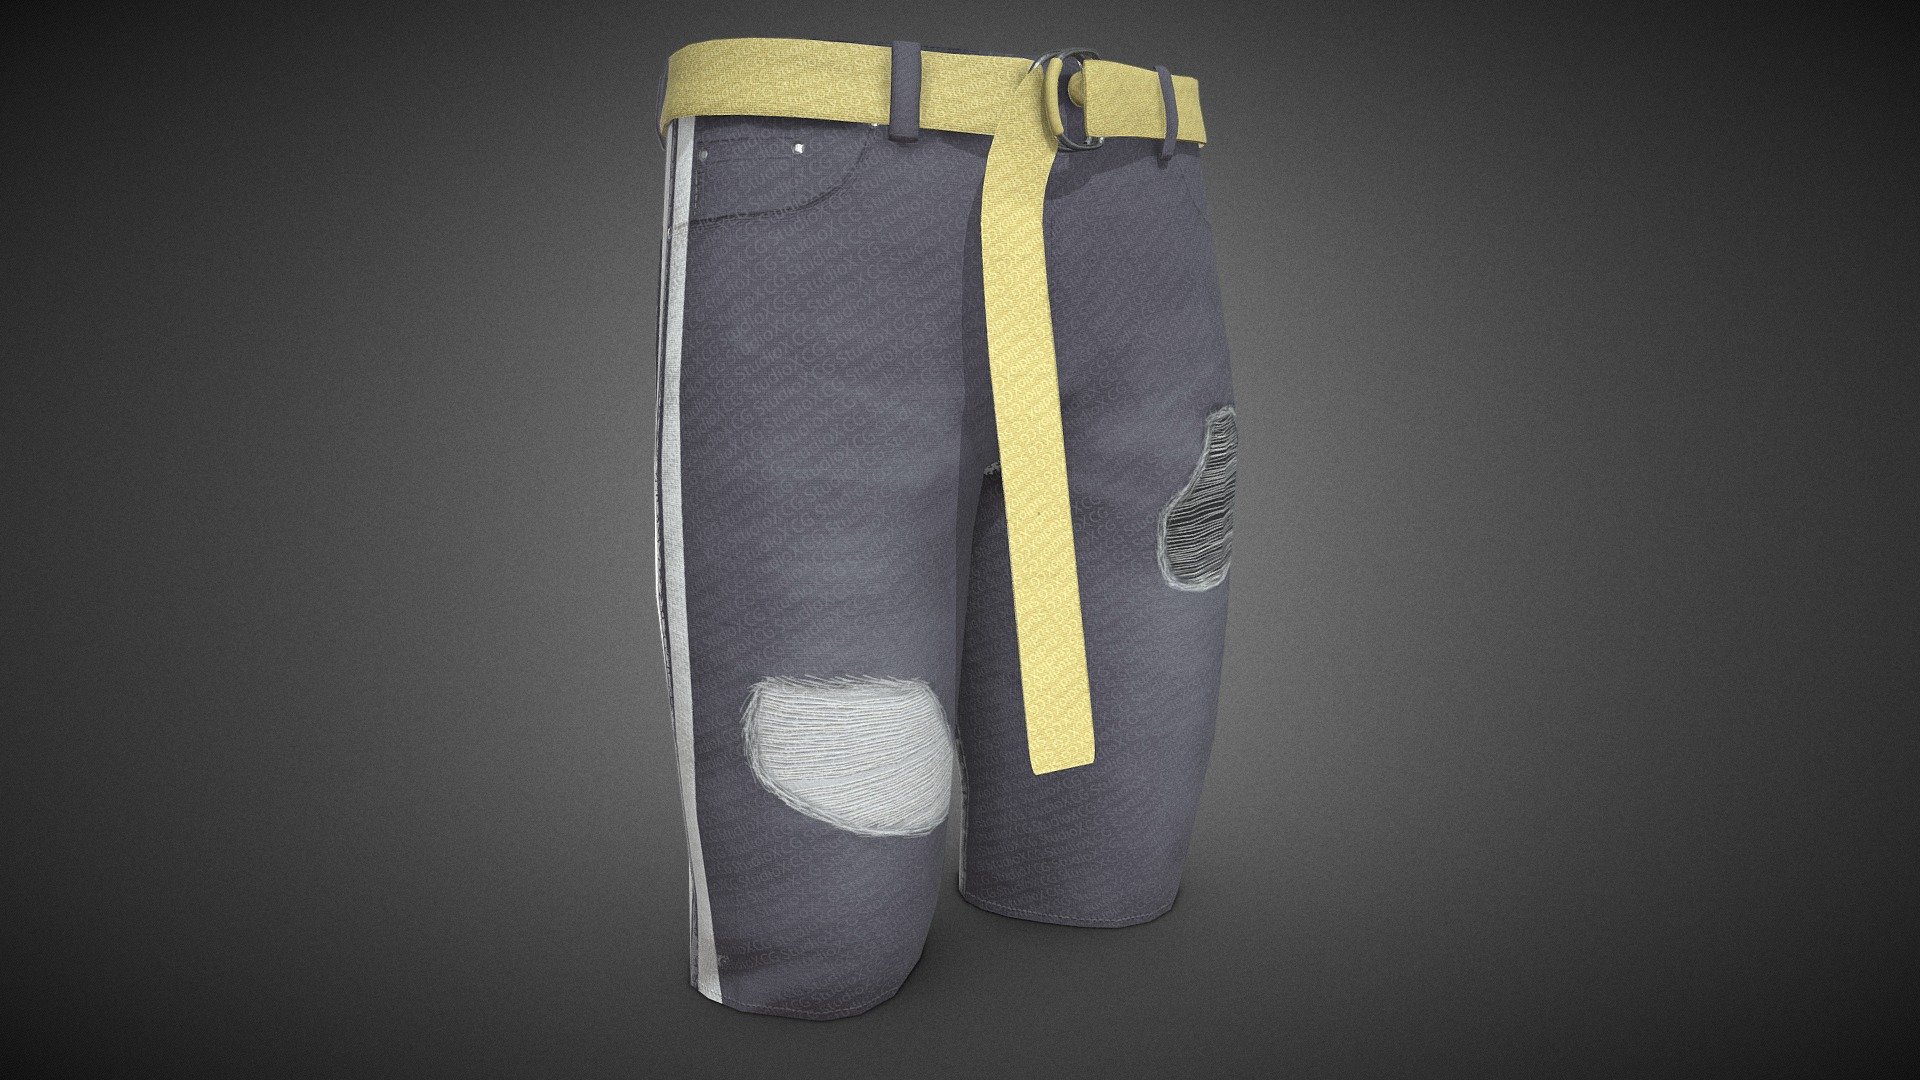 CG StudioX Present :
Jeans Short lowpoly/PBR




This is Jeans Short Comes with Specular and Metalness PBR.

The photo been rendered using Marmoset Toolbag 4 (real time game engine )


Features :



Comes with Specular and Metalness PBR 4K texture .

Good topology.

Low polygon geometry.

The Model is prefect for game for both Specular workflow as in Unity and Metalness as in Unreal engine .

The model also rendered using Marmoset Toolbag 4 with both Specular and Metalness PBR and also included in the product with the full texture.

The texture can be easily adjustable .


Texture :



Two sets of UV [Albedo -Normal-Metalness -Roughness-Gloss-Specular-Ao] (Jeans-Belt) (4096*4096)


Files :
Marmoset Toolbag 4 ,Maya,,FBX,OBj with all the textures.




Contact me for if you have any questions.
 - Jeans Short - Buy Royalty Free 3D model by CG StudioX (@CG_StudioX) 3d model